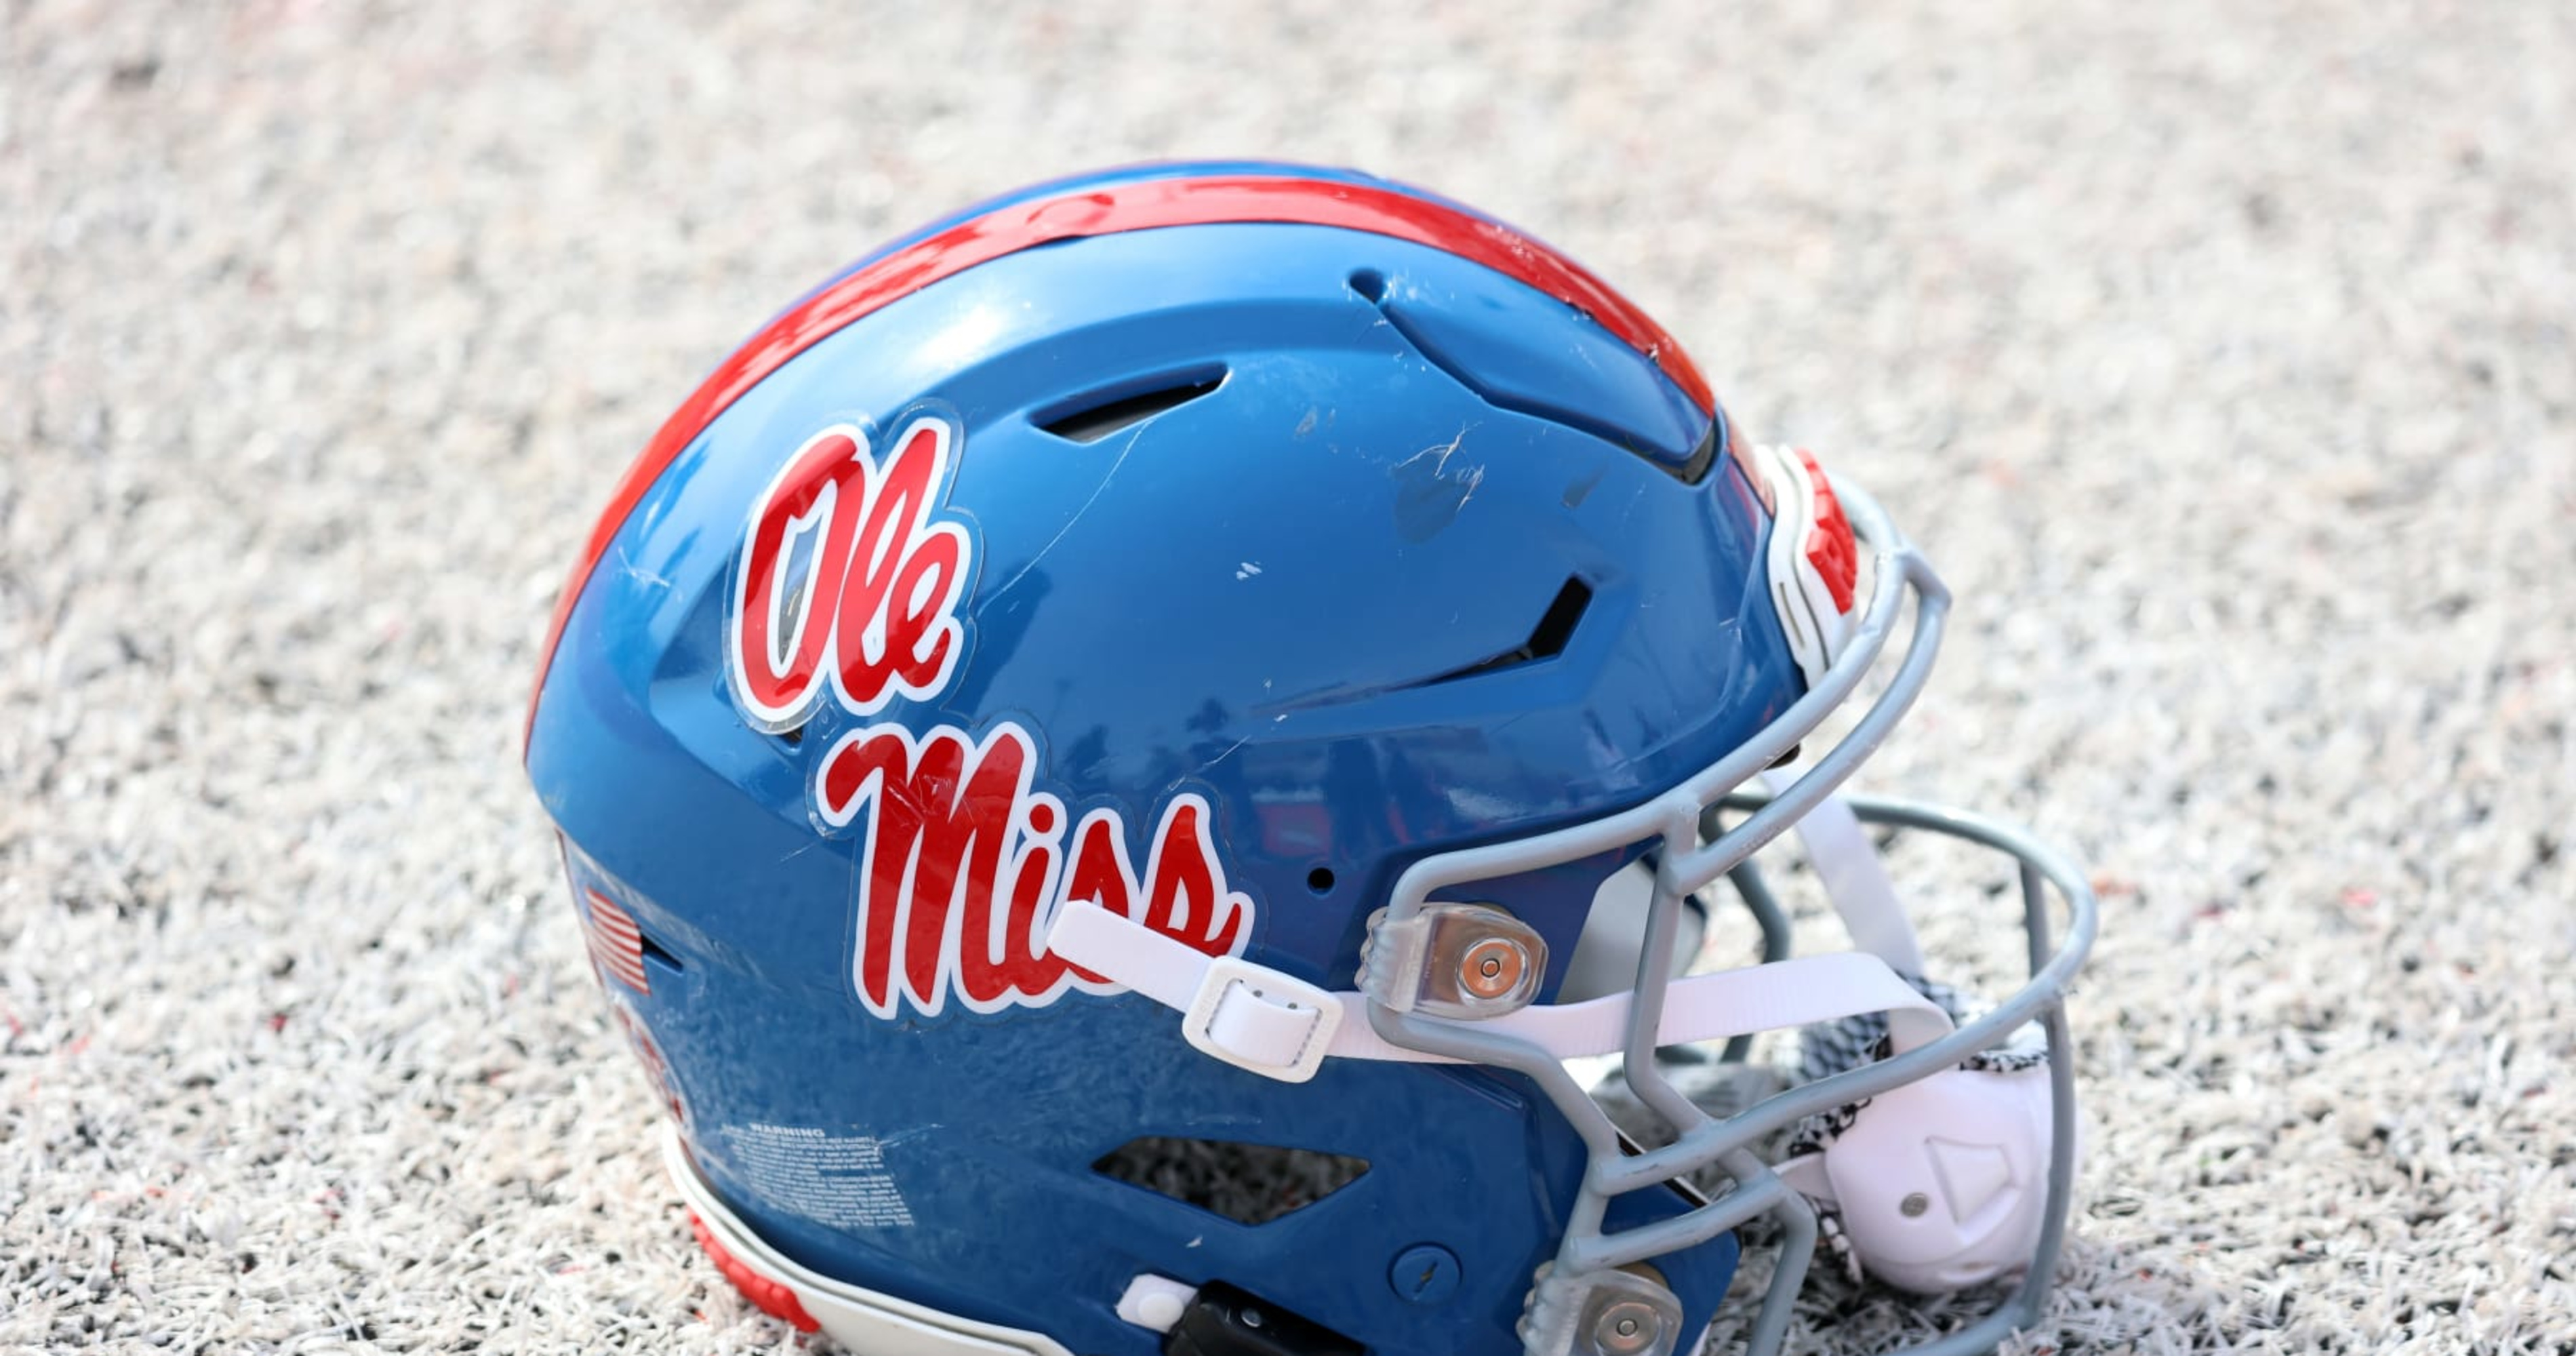 Akylin Dear Commits to Lane Kiffin, Ole Miss; No. 2 RB Recruit in Class of 2025